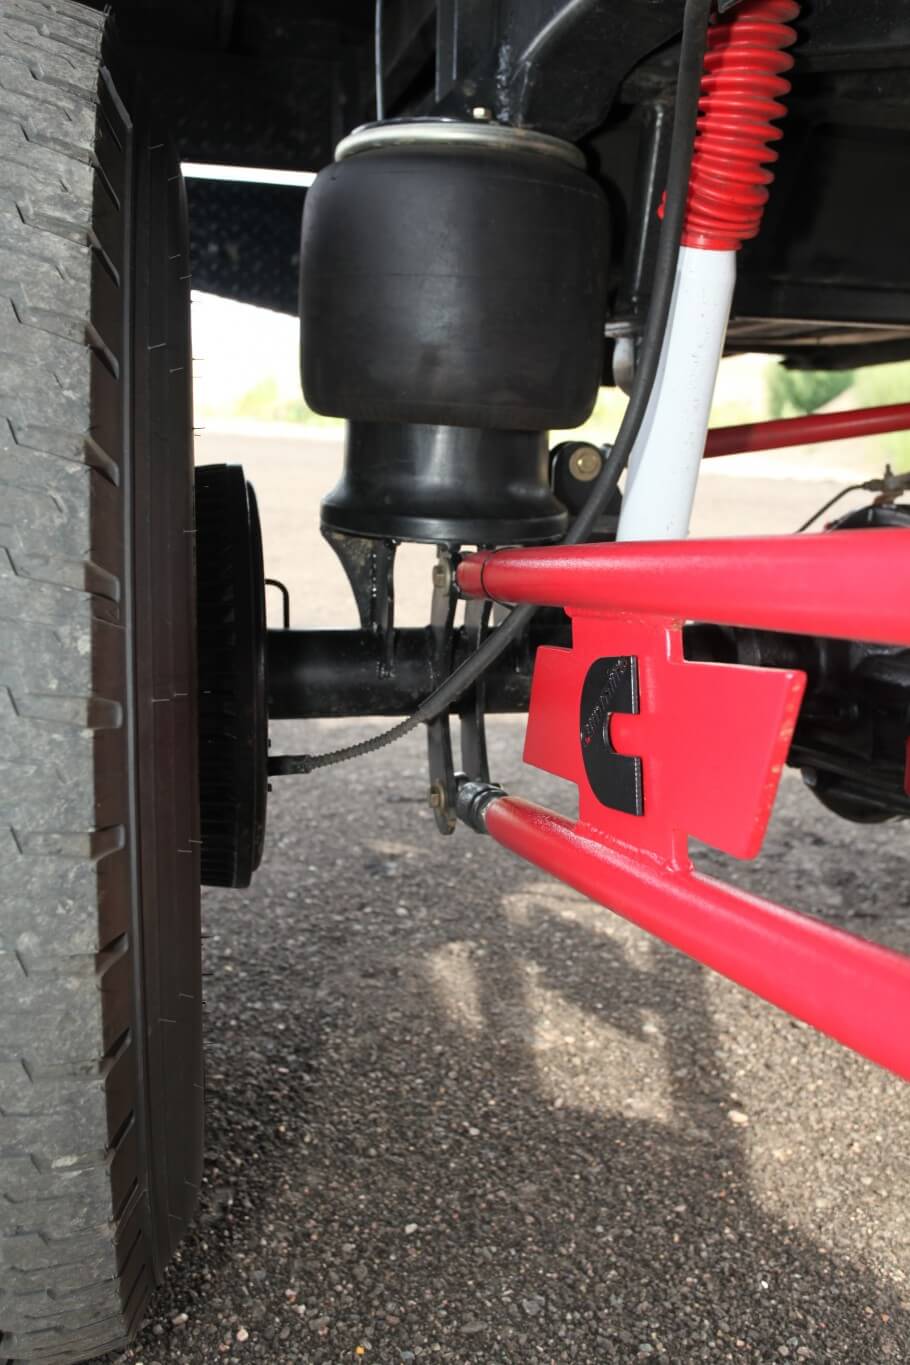 A pair of heavy-duty Firestone air springs were stripped off a Kenworth semi truck and used on this build. Custom mounting perches were fabricated for the “bags” along with mounting brackets for the three-link traction bars. A pair of Rancho 9000 adjustable shocks were re-shimmed and re-valved for better off-road performance. 